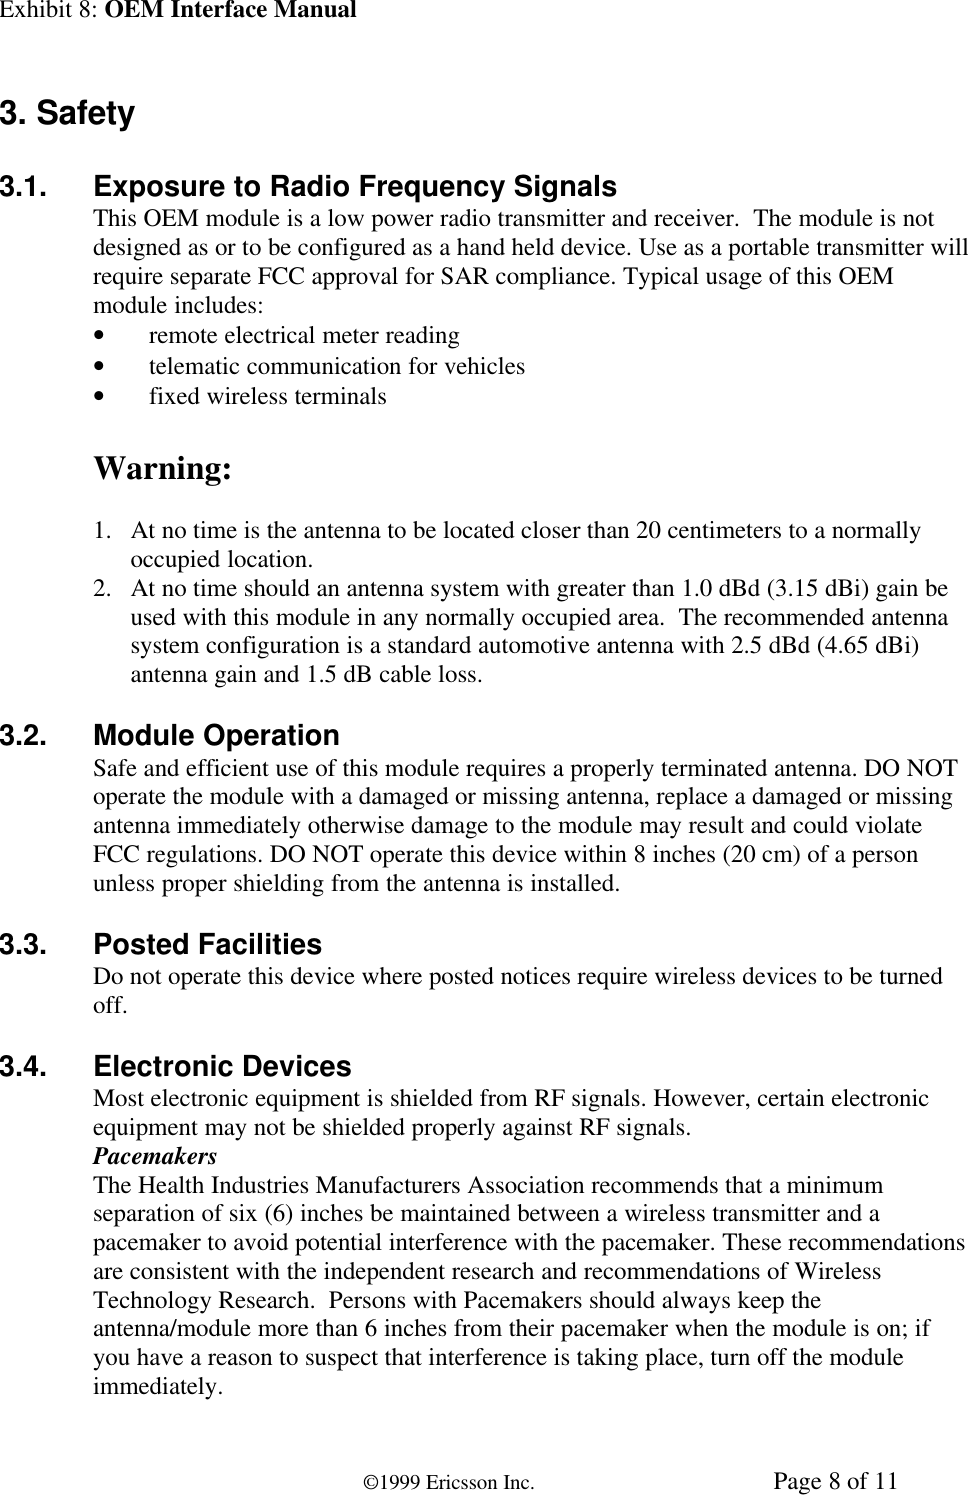 Exhibit 8: OEM Interface Manual©1999 Ericsson Inc. Page 8 of 113. Safety3.1. Exposure to Radio Frequency SignalsThis OEM module is a low power radio transmitter and receiver.  The module is notdesigned as or to be configured as a hand held device. Use as a portable transmitter willrequire separate FCC approval for SAR compliance. Typical usage of this OEMmodule includes:• remote electrical meter reading• telematic communication for vehicles• fixed wireless terminalsWarning:1. At no time is the antenna to be located closer than 20 centimeters to a normallyoccupied location.2. At no time should an antenna system with greater than 1.0 dBd (3.15 dBi) gain beused with this module in any normally occupied area.  The recommended antennasystem configuration is a standard automotive antenna with 2.5 dBd (4.65 dBi)antenna gain and 1.5 dB cable loss.3.2. Module OperationSafe and efficient use of this module requires a properly terminated antenna. DO NOToperate the module with a damaged or missing antenna, replace a damaged or missingantenna immediately otherwise damage to the module may result and could violateFCC regulations. DO NOT operate this device within 8 inches (20 cm) of a personunless proper shielding from the antenna is installed.3.3. Posted FacilitiesDo not operate this device where posted notices require wireless devices to be turnedoff.3.4. Electronic DevicesMost electronic equipment is shielded from RF signals. However, certain electronicequipment may not be shielded properly against RF signals.PacemakersThe Health Industries Manufacturers Association recommends that a minimumseparation of six (6) inches be maintained between a wireless transmitter and apacemaker to avoid potential interference with the pacemaker. These recommendationsare consistent with the independent research and recommendations of WirelessTechnology Research.  Persons with Pacemakers should always keep theantenna/module more than 6 inches from their pacemaker when the module is on; ifyou have a reason to suspect that interference is taking place, turn off the moduleimmediately.